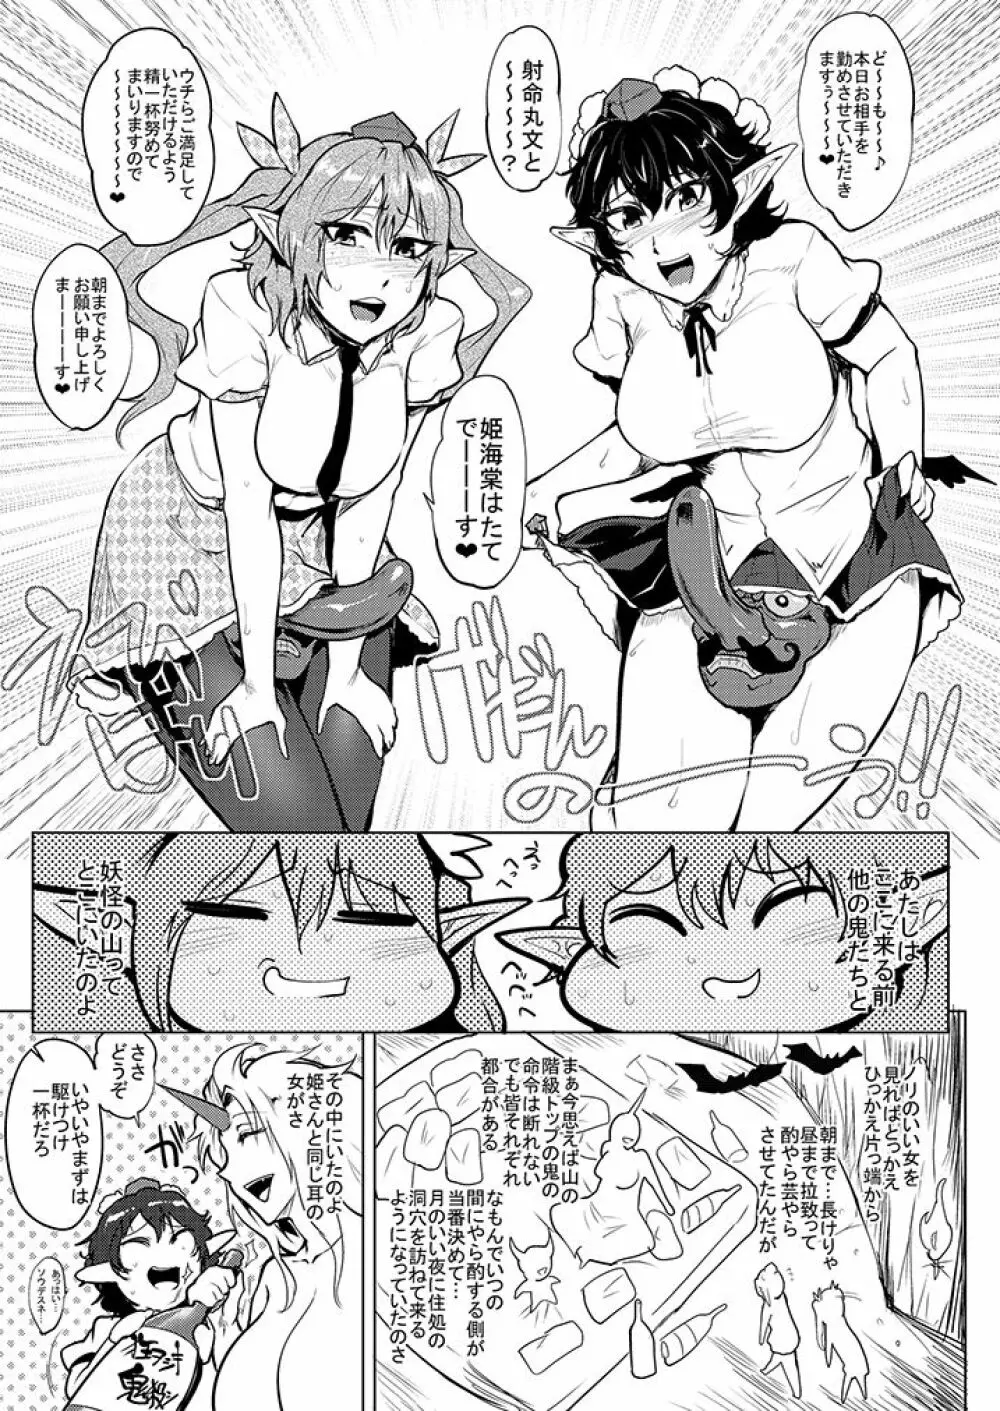 SAKUYA MAID in HEAVEN/ALL IN 1 - page459